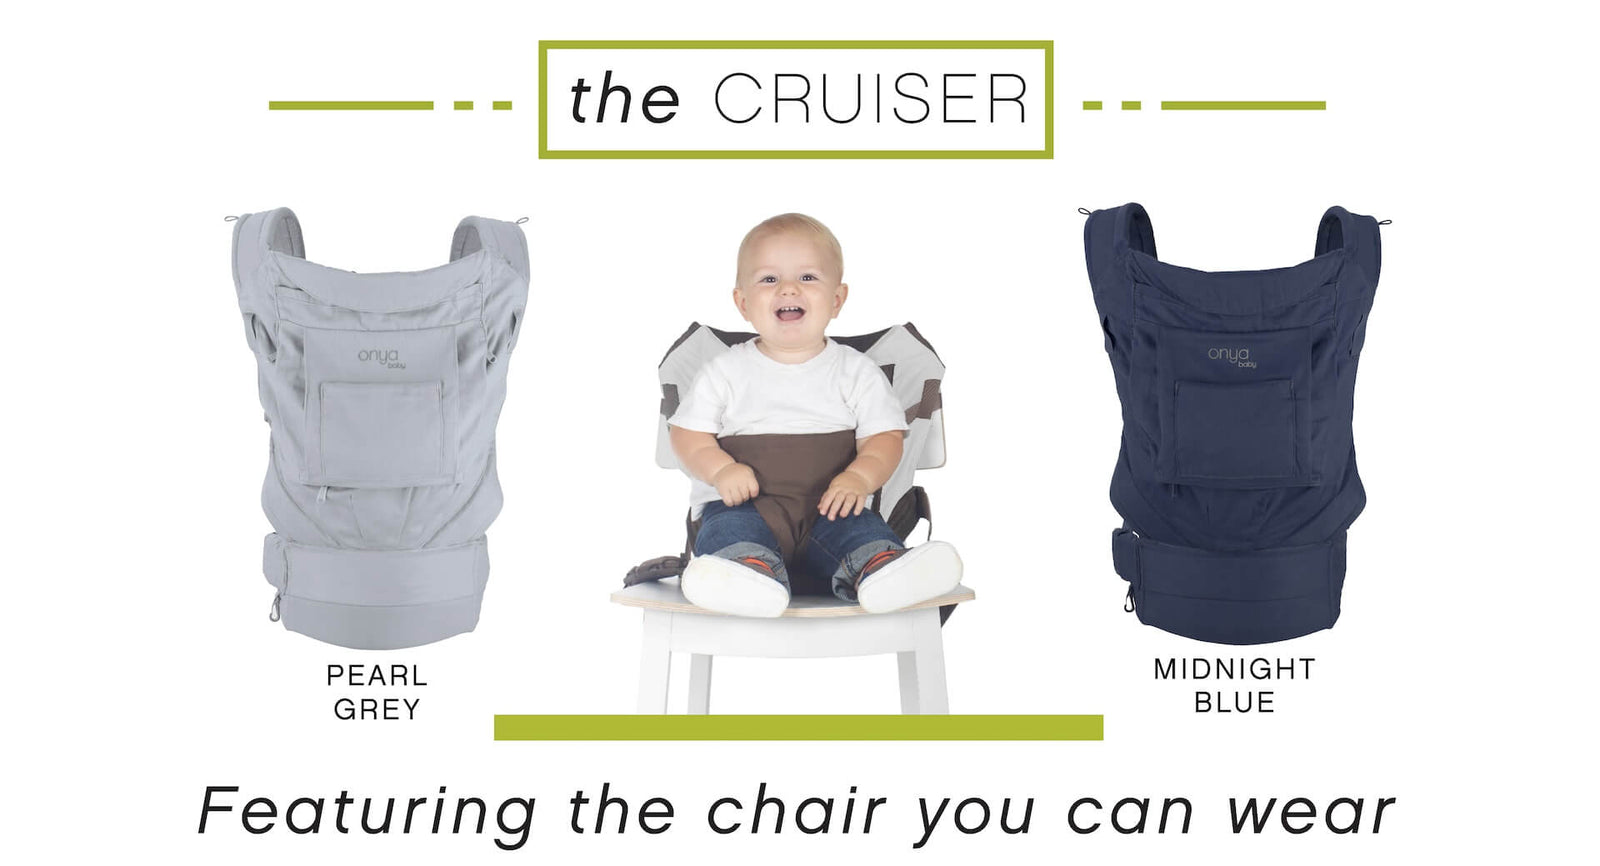 Product display showing all color variations of the Onya Baby Cruiser with baby sitting in Onya Baby Carrier converted to chair harness